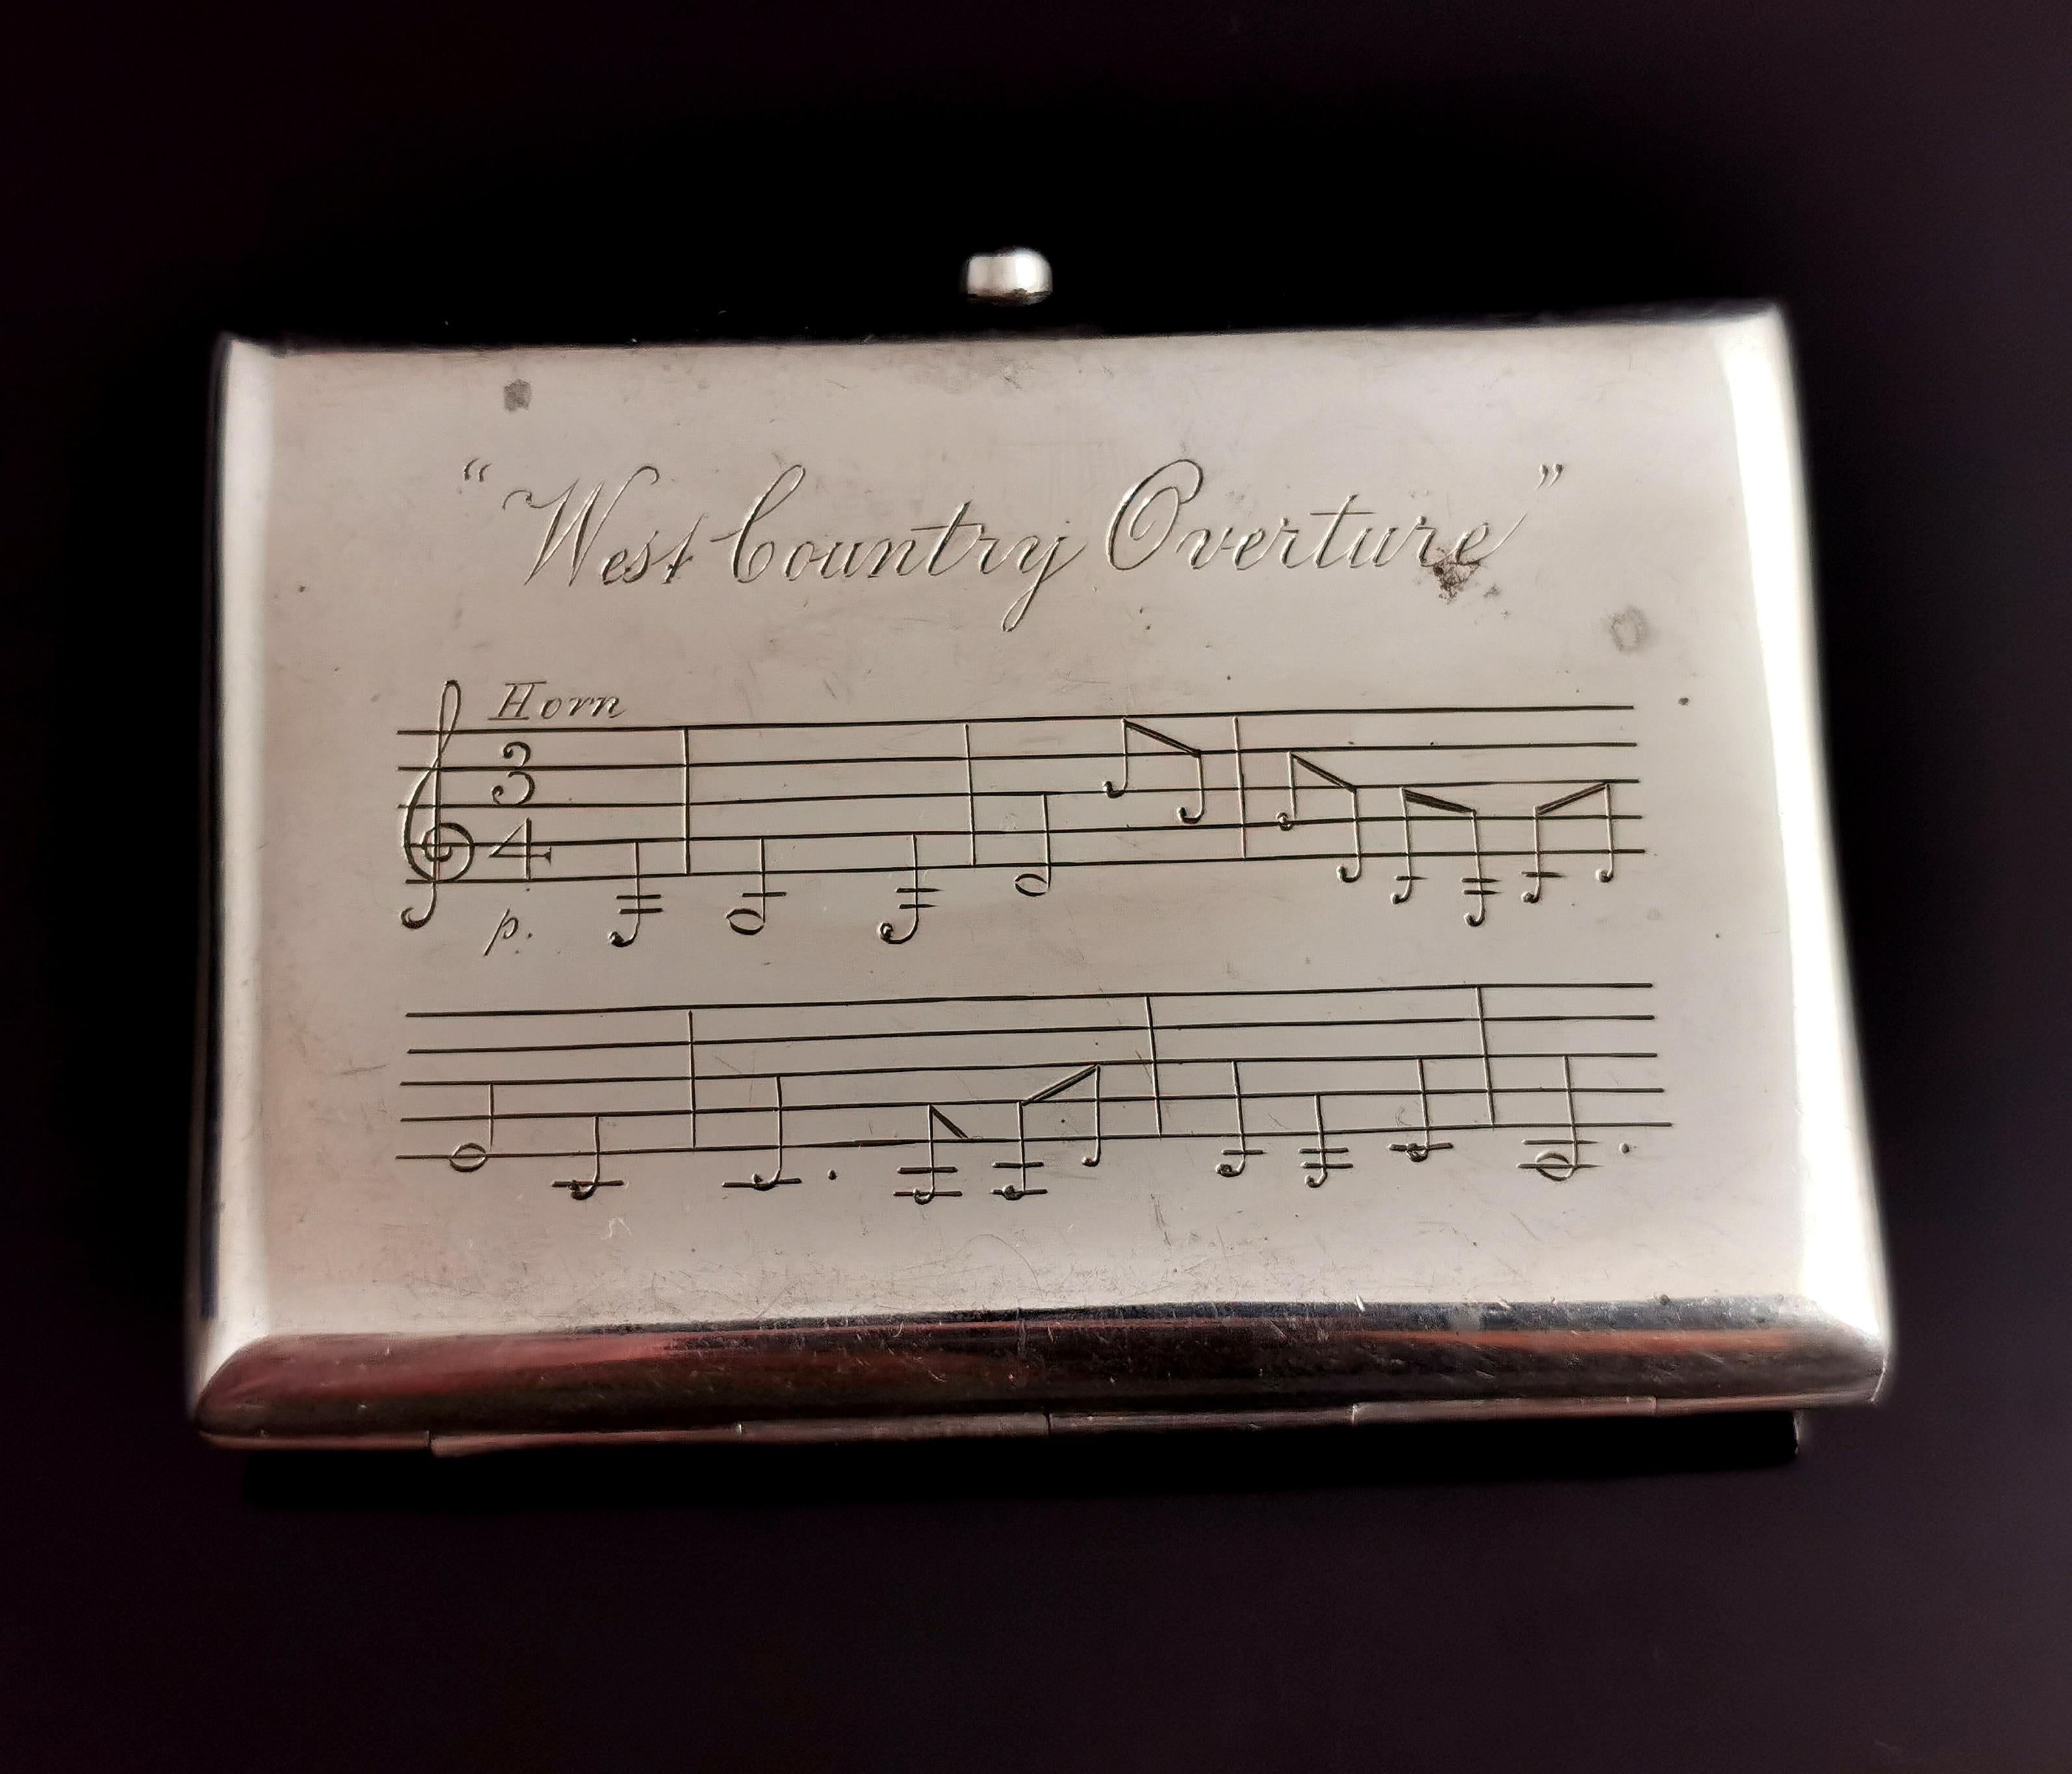 An unusual antique cigarette case, Victorian era sterling silver, it is engraved with musical staves from the West Country Overture.

A fully hallmarked smooth silver case, engraved to the front and the back.

Gilt lined with the original interior